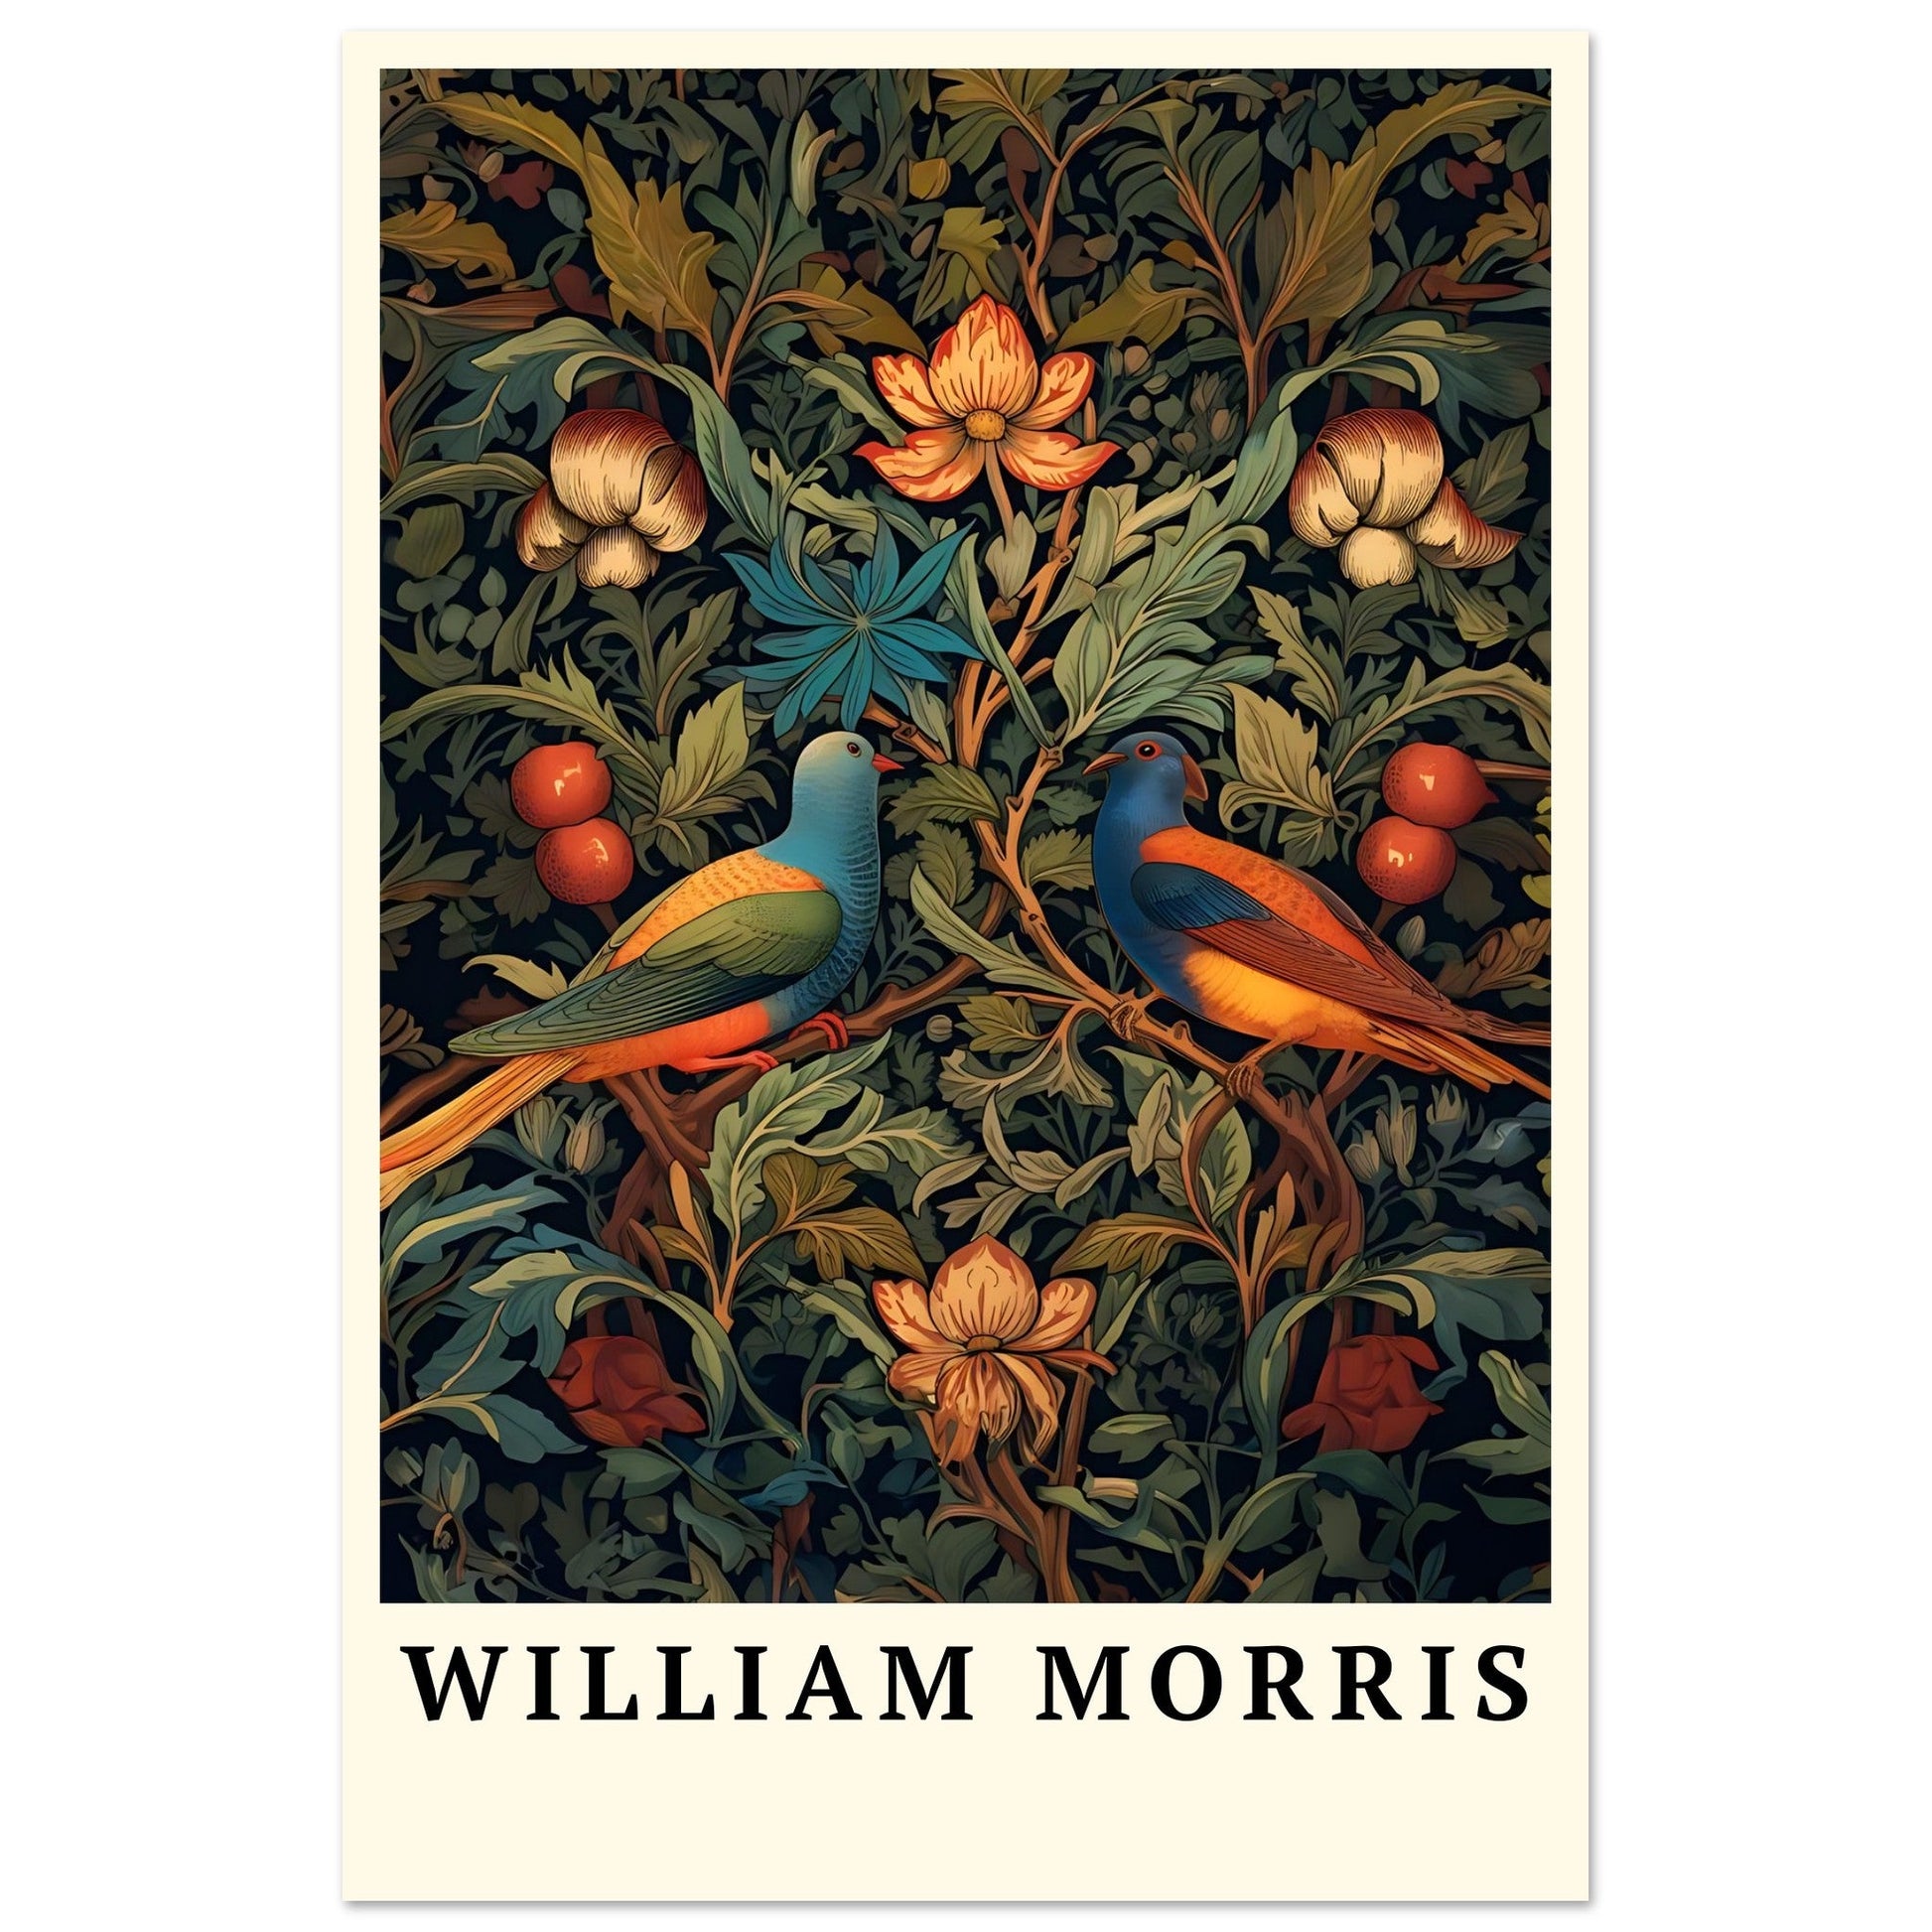 Birds and Flowers - William Morris Art Print, all at prints, Arts & Crafts, decorative., #illieeart